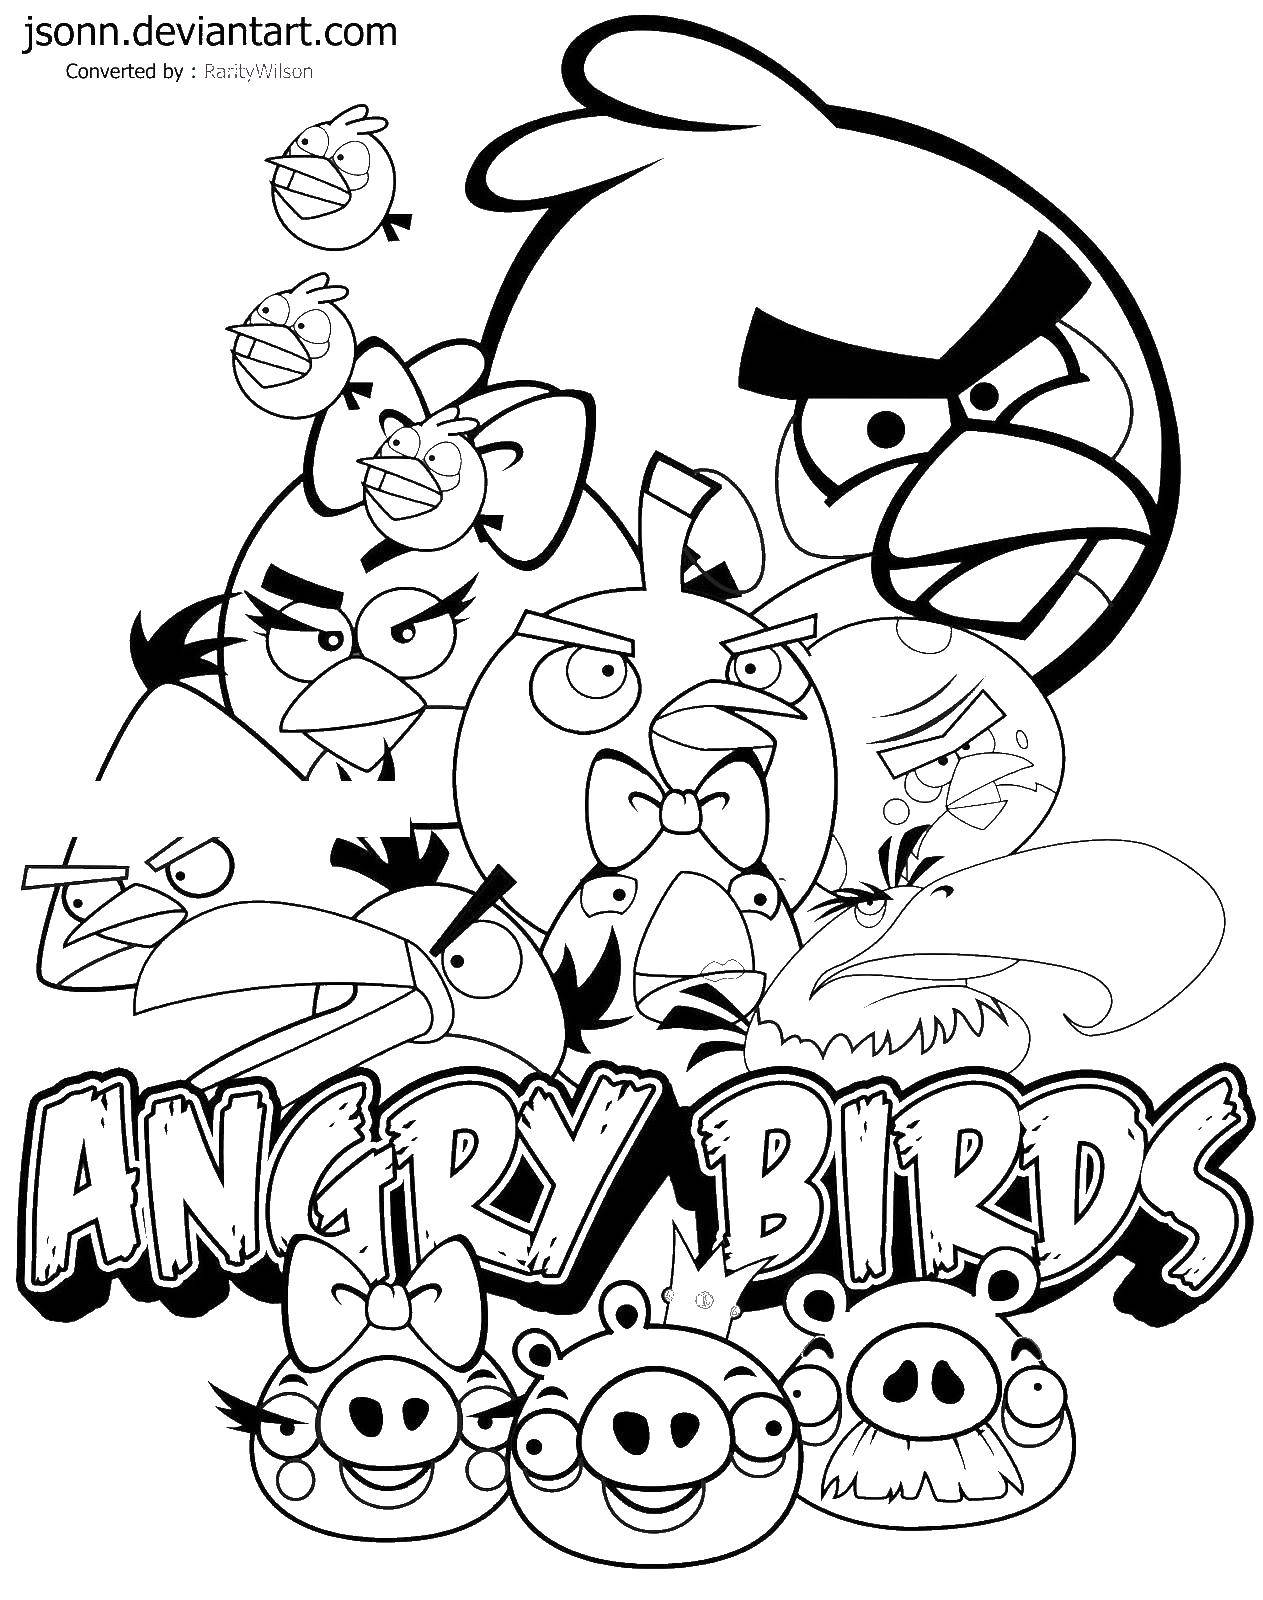 Coloring Angry birds birds. Category angry birds. Tags:  angry birds, pig, bird.